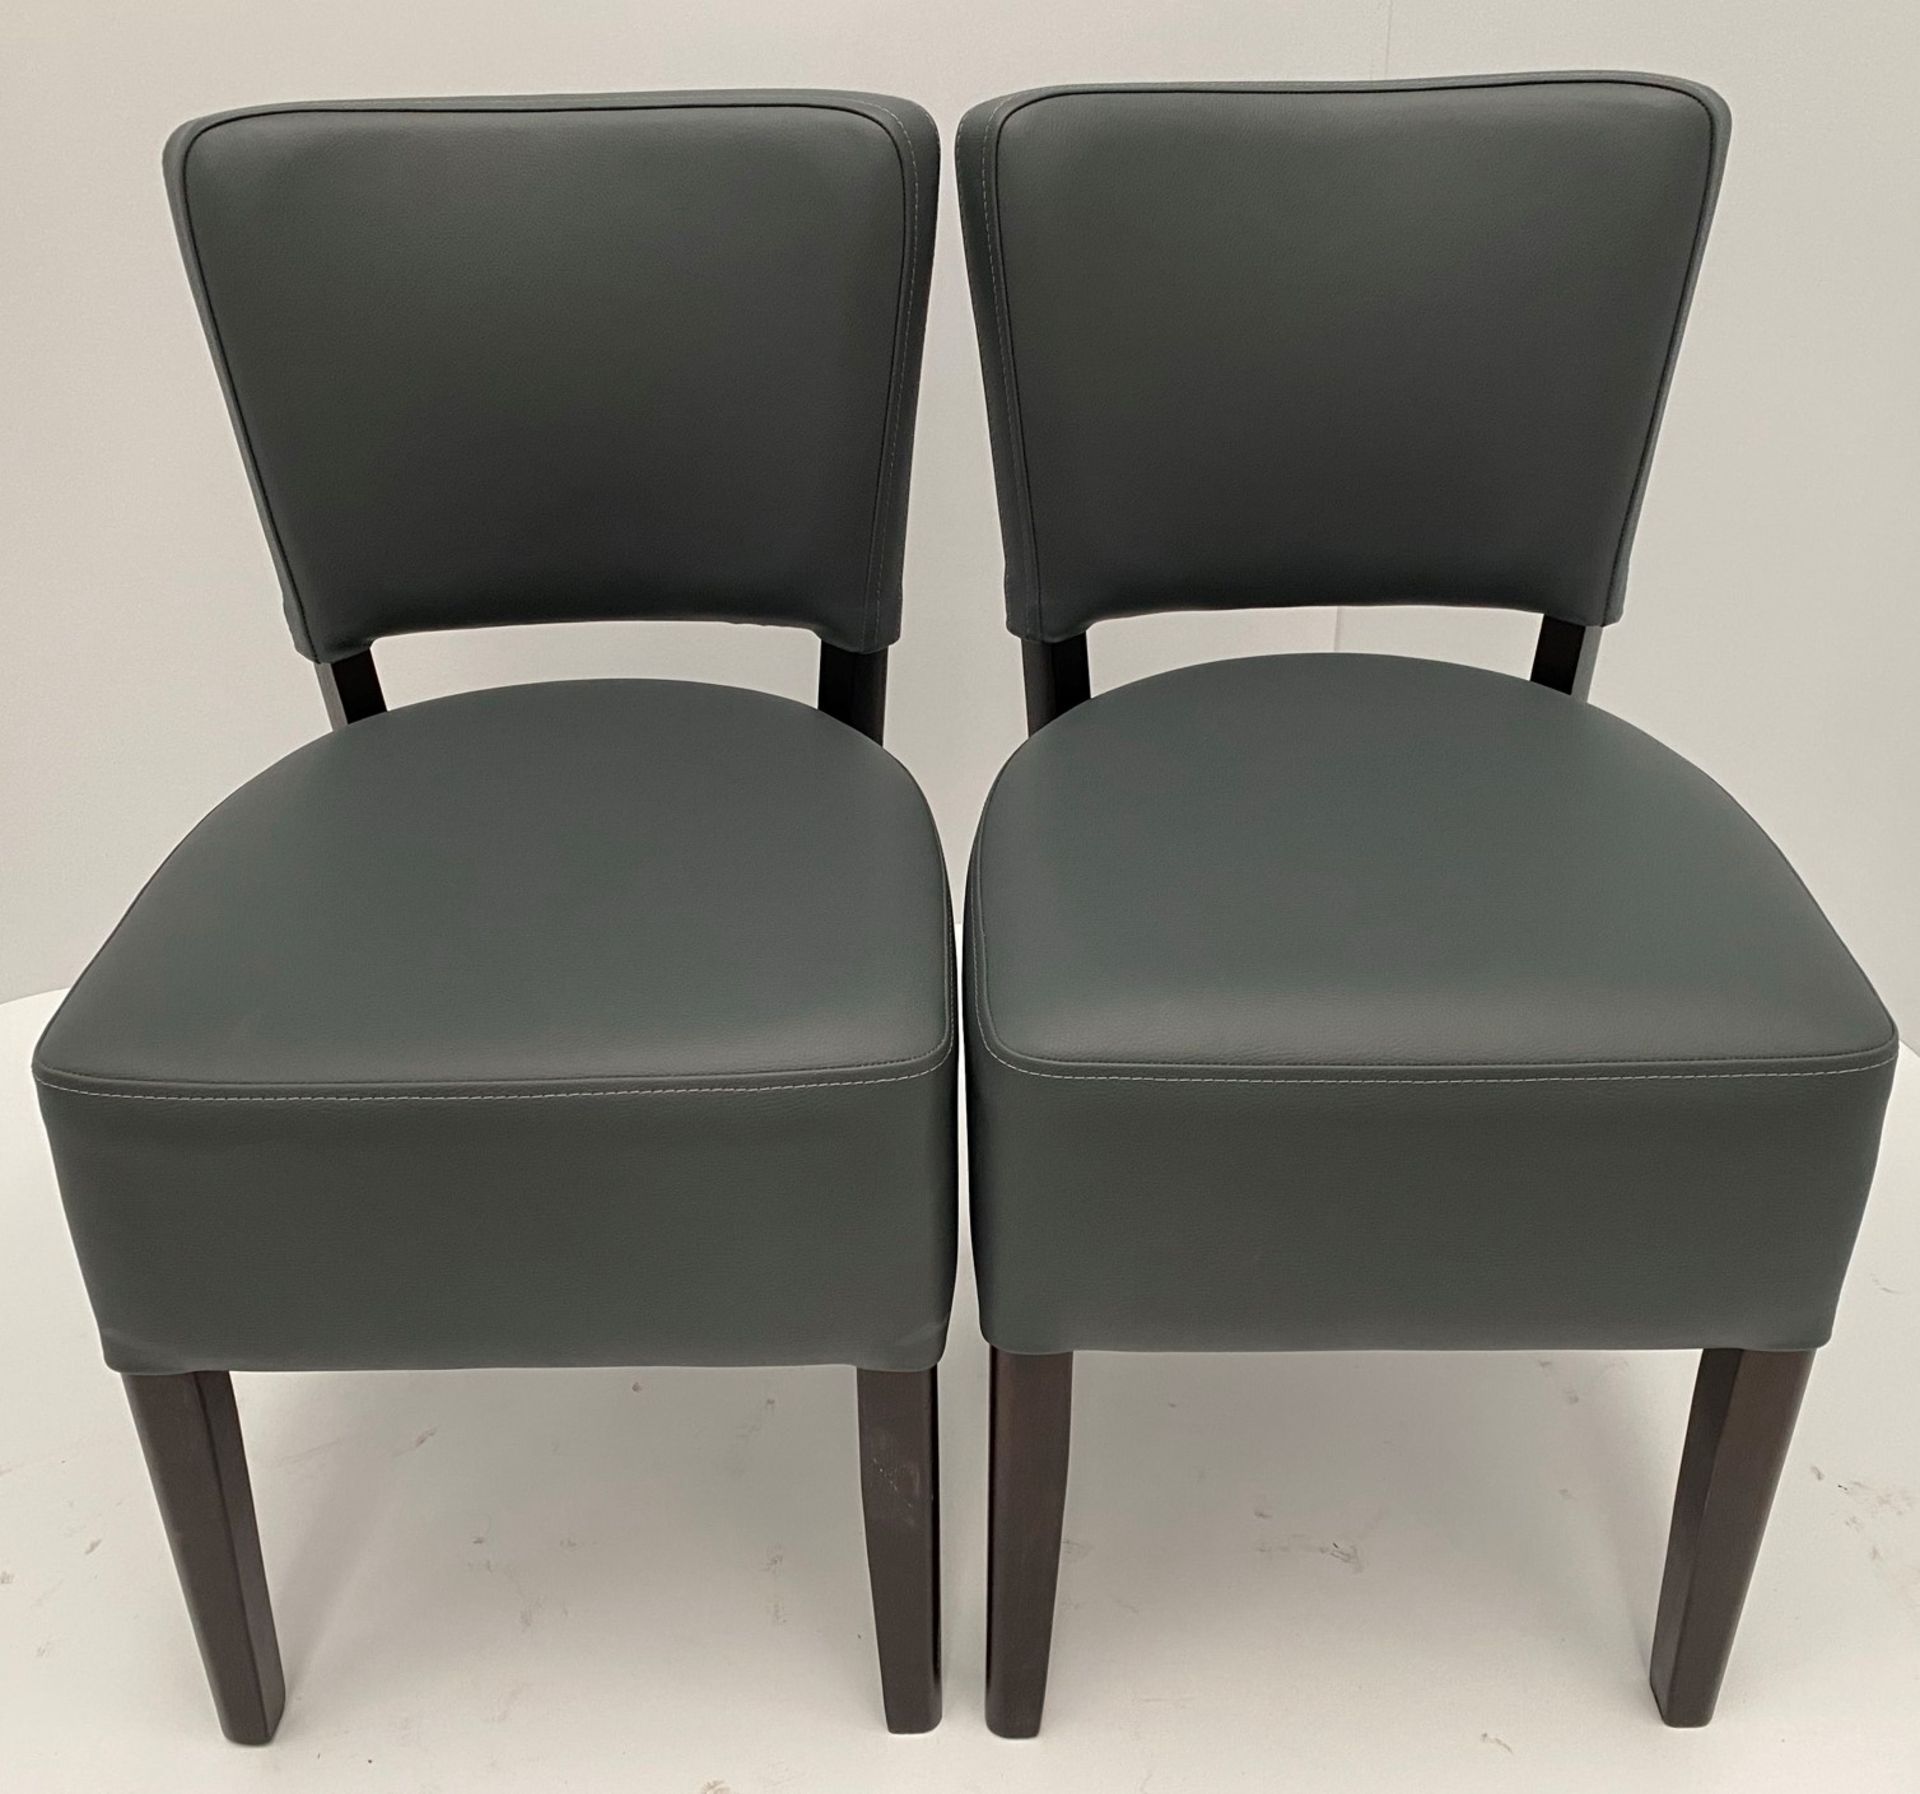 2 x Oregon Vena SA-4 Grey side/dining chairs with Wenge coloured frames